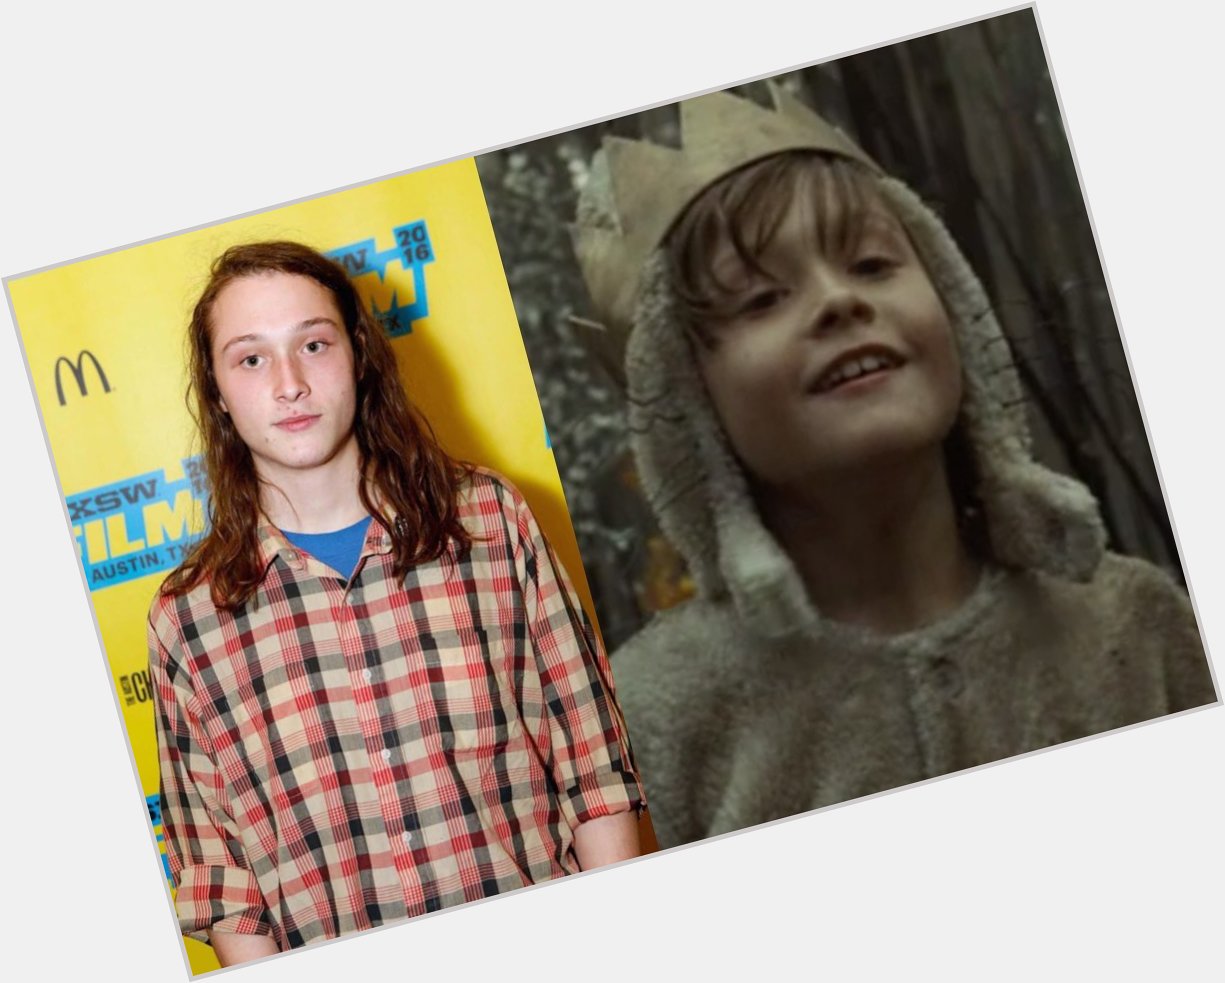 Happy 24th Birthday to Max Records! The actor who played Max in Where the Wild Things Are (2009). 